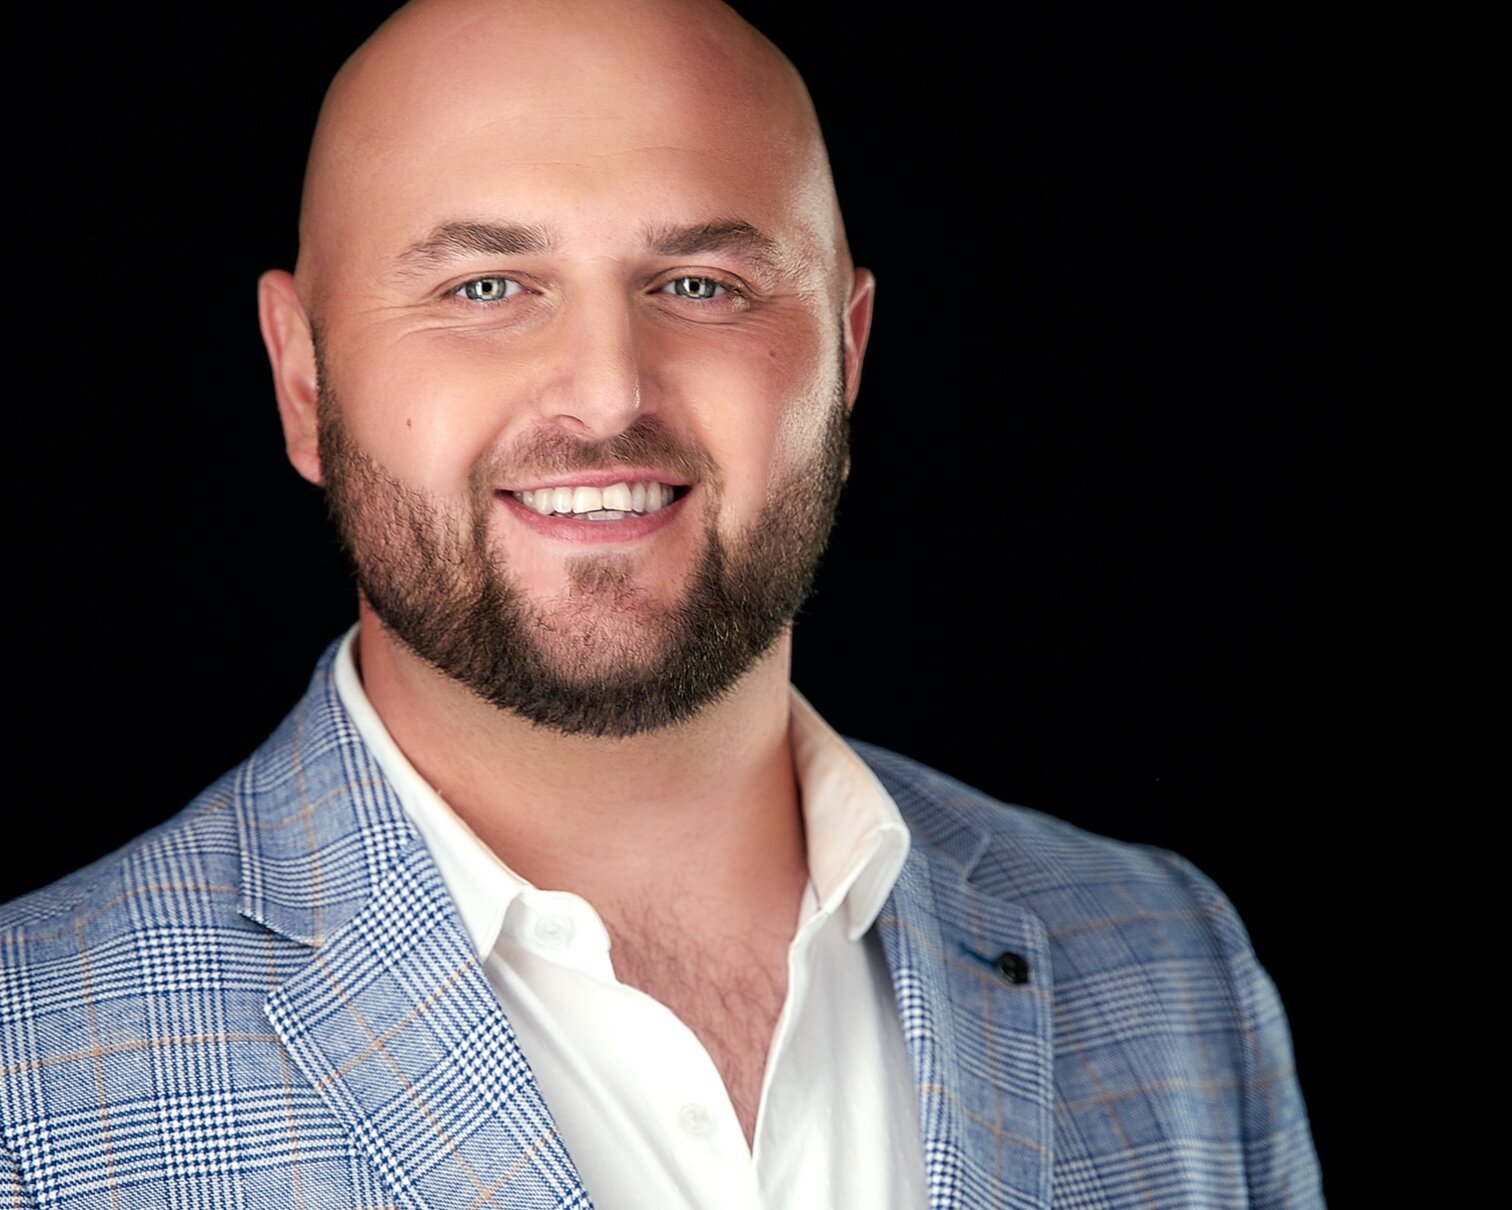 20190708_ForestHillRealEstate_Headshots0152 1_Social.png